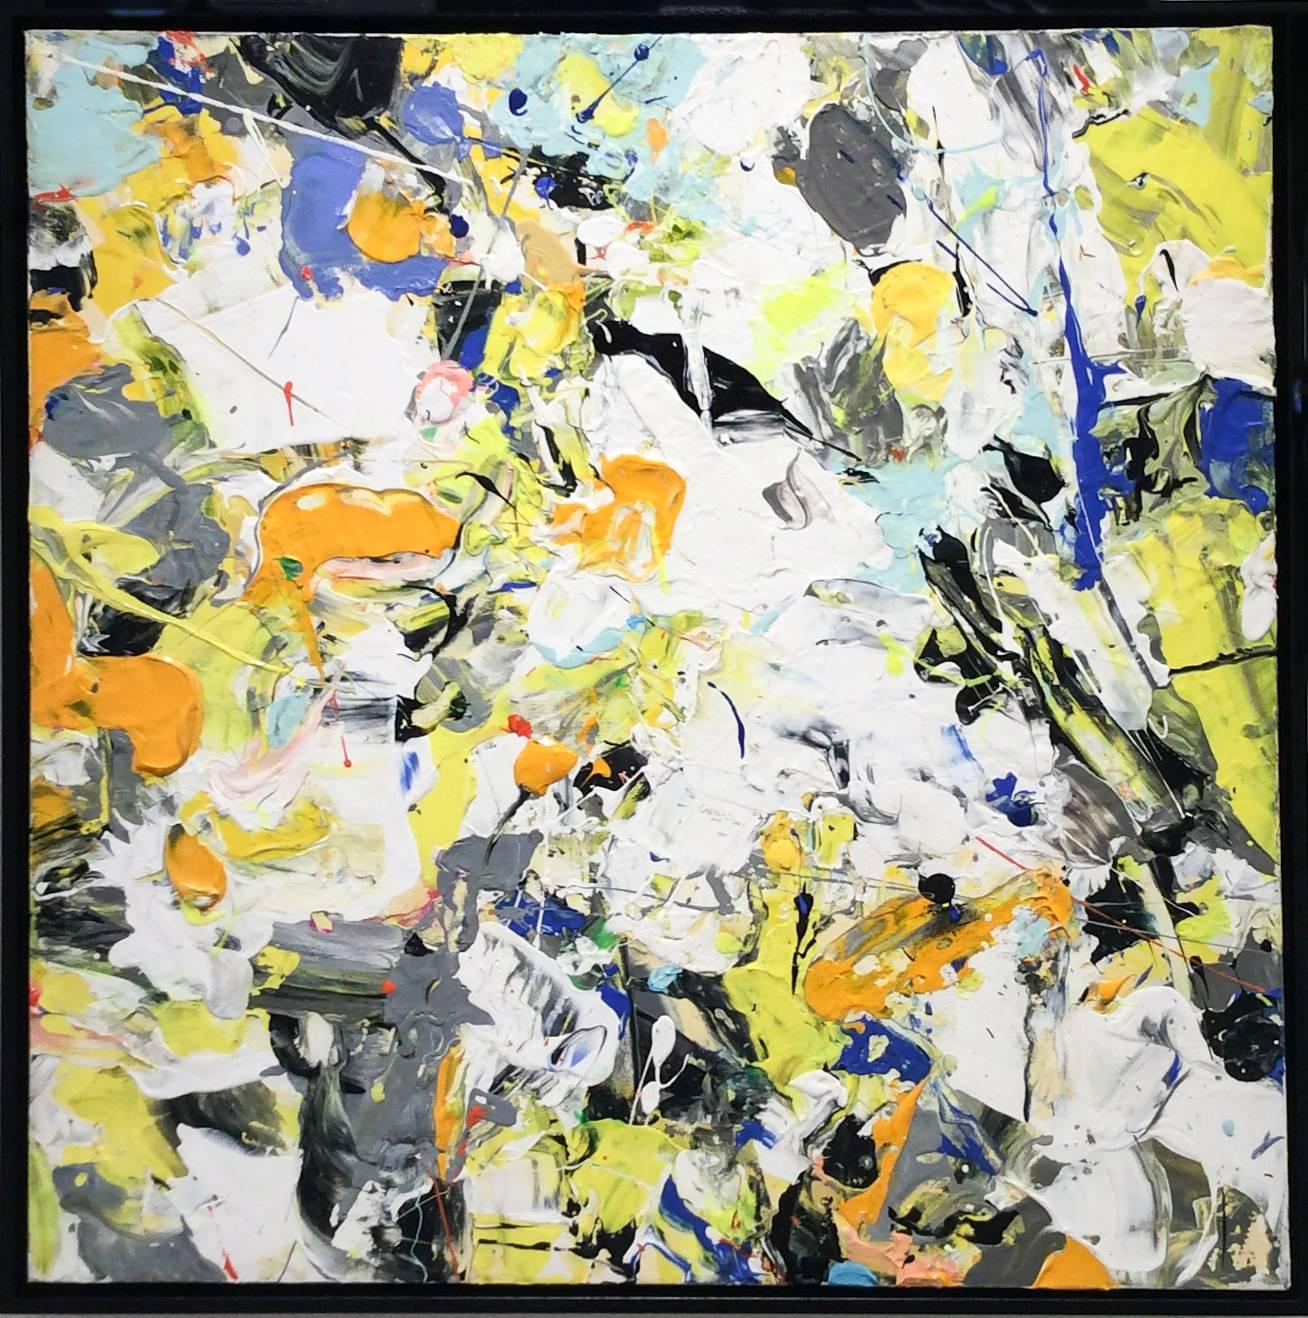 Adam Cohen Abstract Painting - Gentle Morning: Abstract Expressionist Painting on Canvas in Yellow, White, Blue